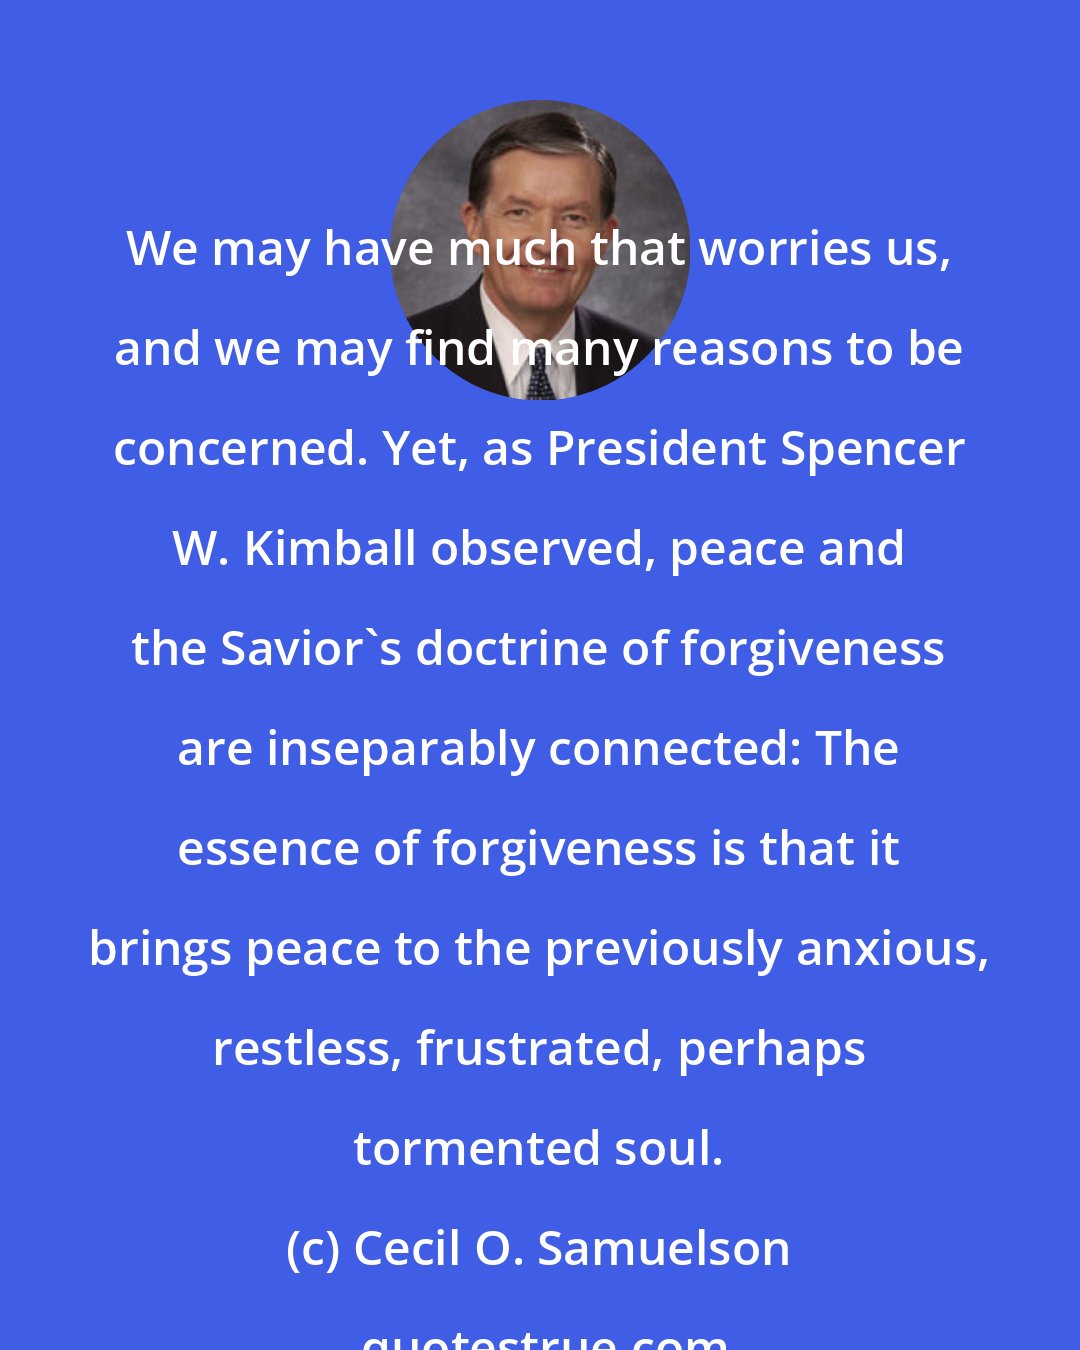 Cecil O. Samuelson: We may have much that worries us, and we may find many reasons to be concerned. Yet, as President Spencer W. Kimball observed, peace and the Savior's doctrine of forgiveness are inseparably connected: The essence of forgiveness is that it brings peace to the previously anxious, restless, frustrated, perhaps tormented soul.